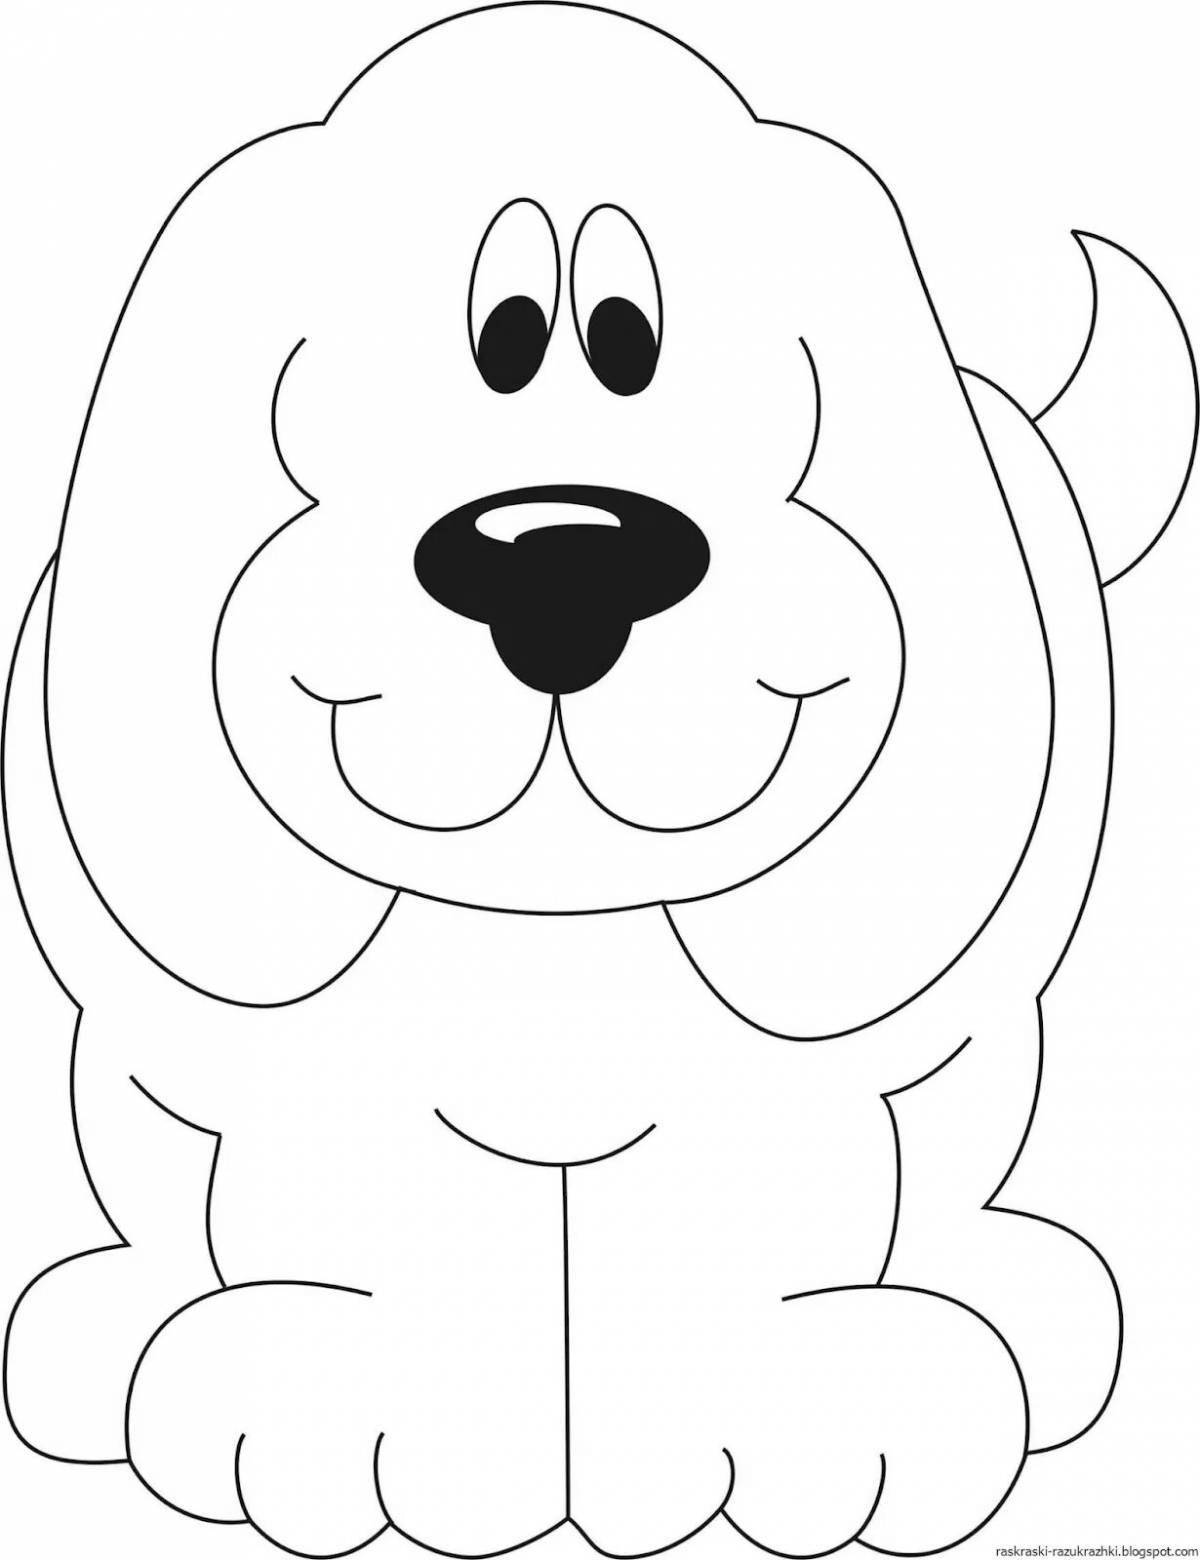 Cute dog coloring book for kids 2-3 years old